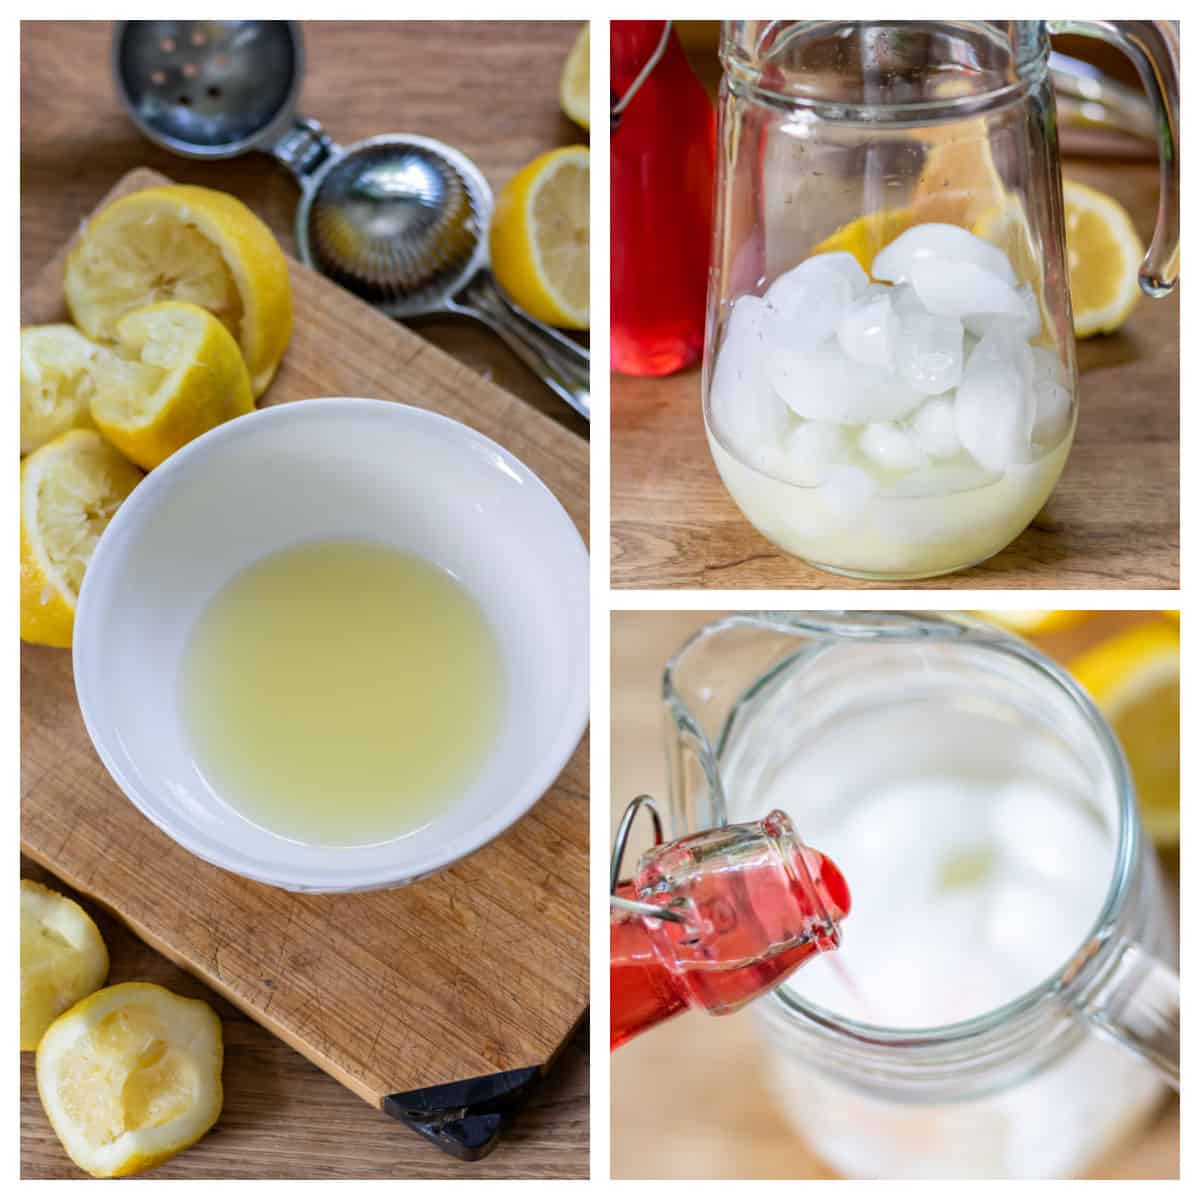 Juicing lemons, adding it to a pitcher of ice.